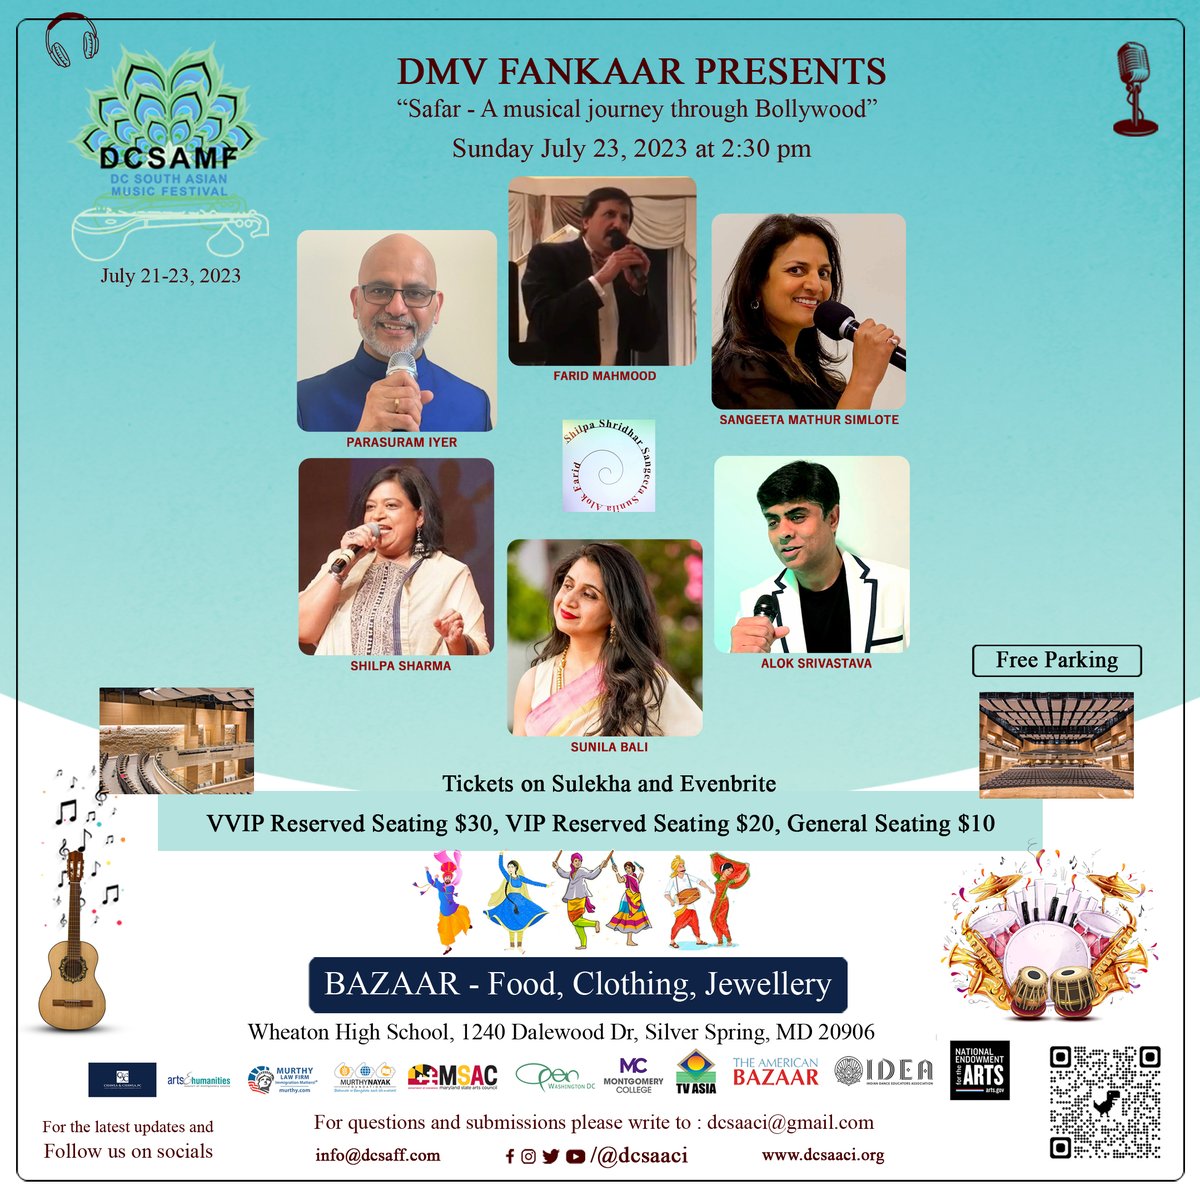 Get ready to experience DMV Fankaar - A musical journey through Bollywood! 

Watch this snippet of Sangeeta Mathur Simlote:
drive.google.com/file/d/1BKHWP-…

Tickets are still available; visit: dcsaaci.org to buy them!
Use discount code: DCSAMF4JULY20

#thingstododc